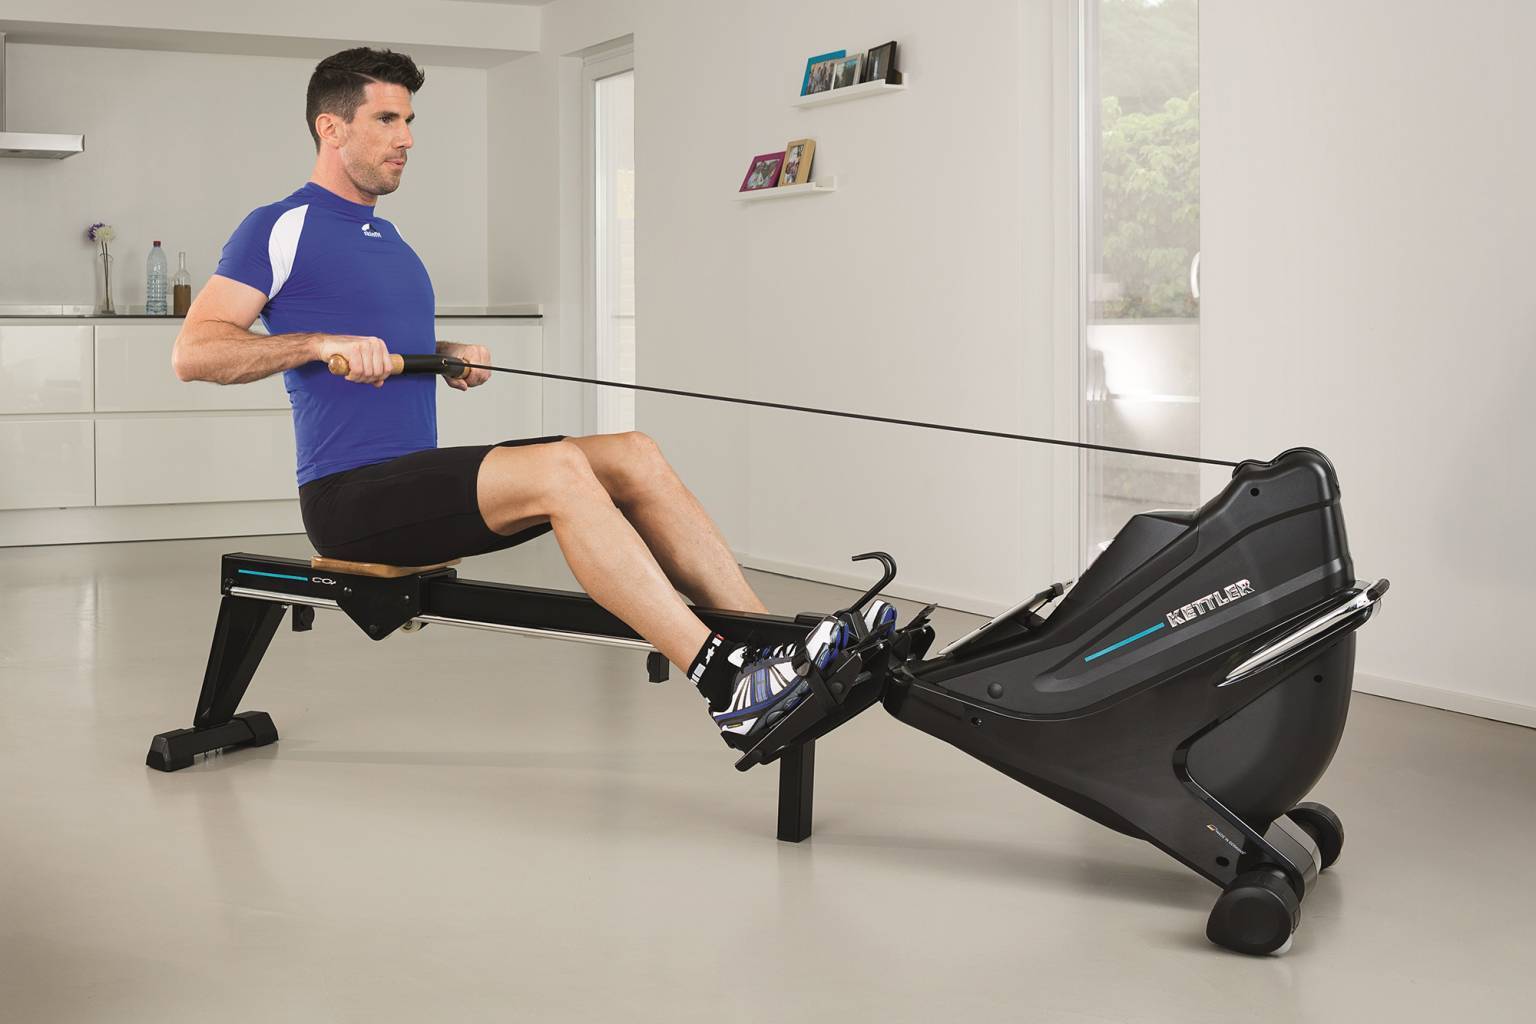 Doing Exercises on Rowing Machine at Home